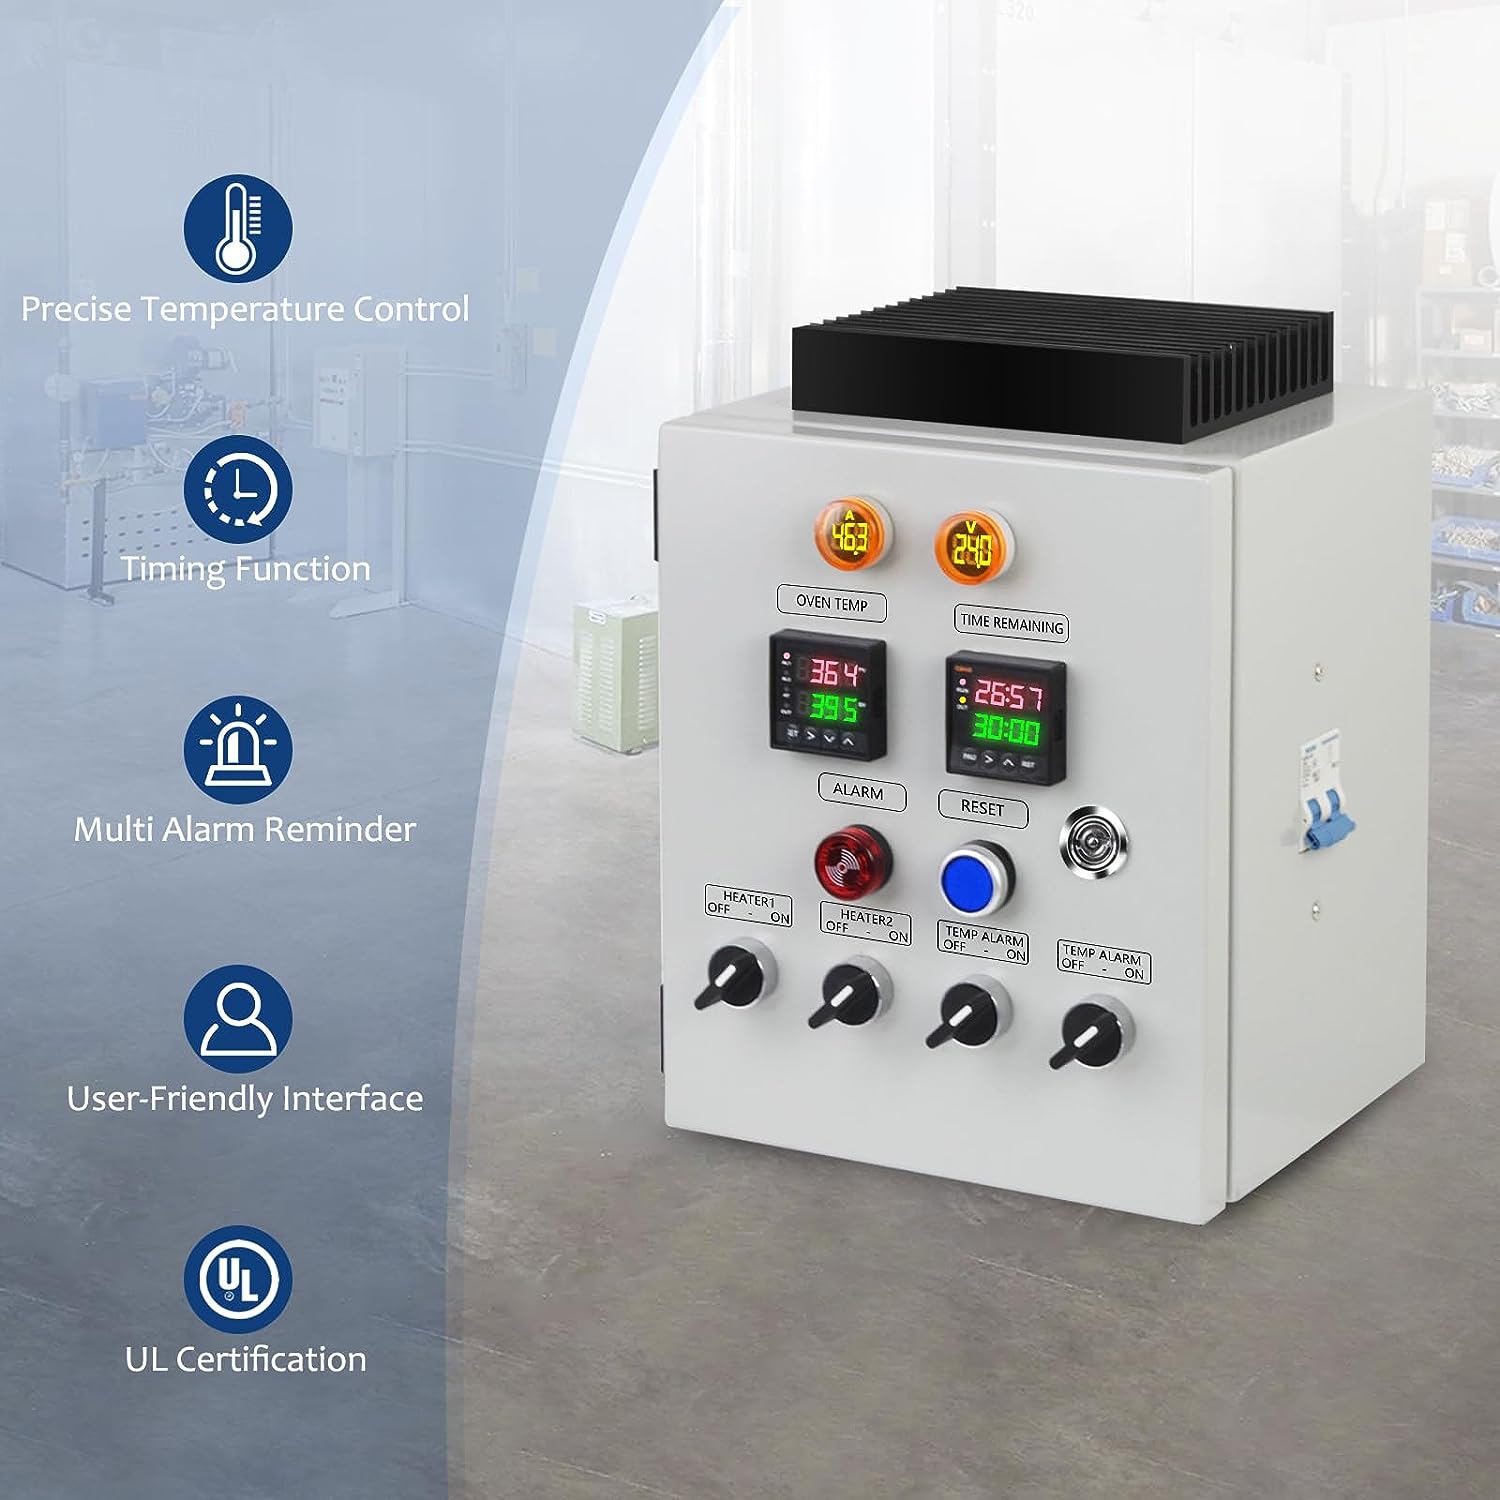 Briidea Control Panel for Powder Coating Oven (240V 50A), Precisely Control Temperature and Time with Dual-line PID Controller, Heating Element up 12000 Watt, Temperature Probe Withstand up to 900°F